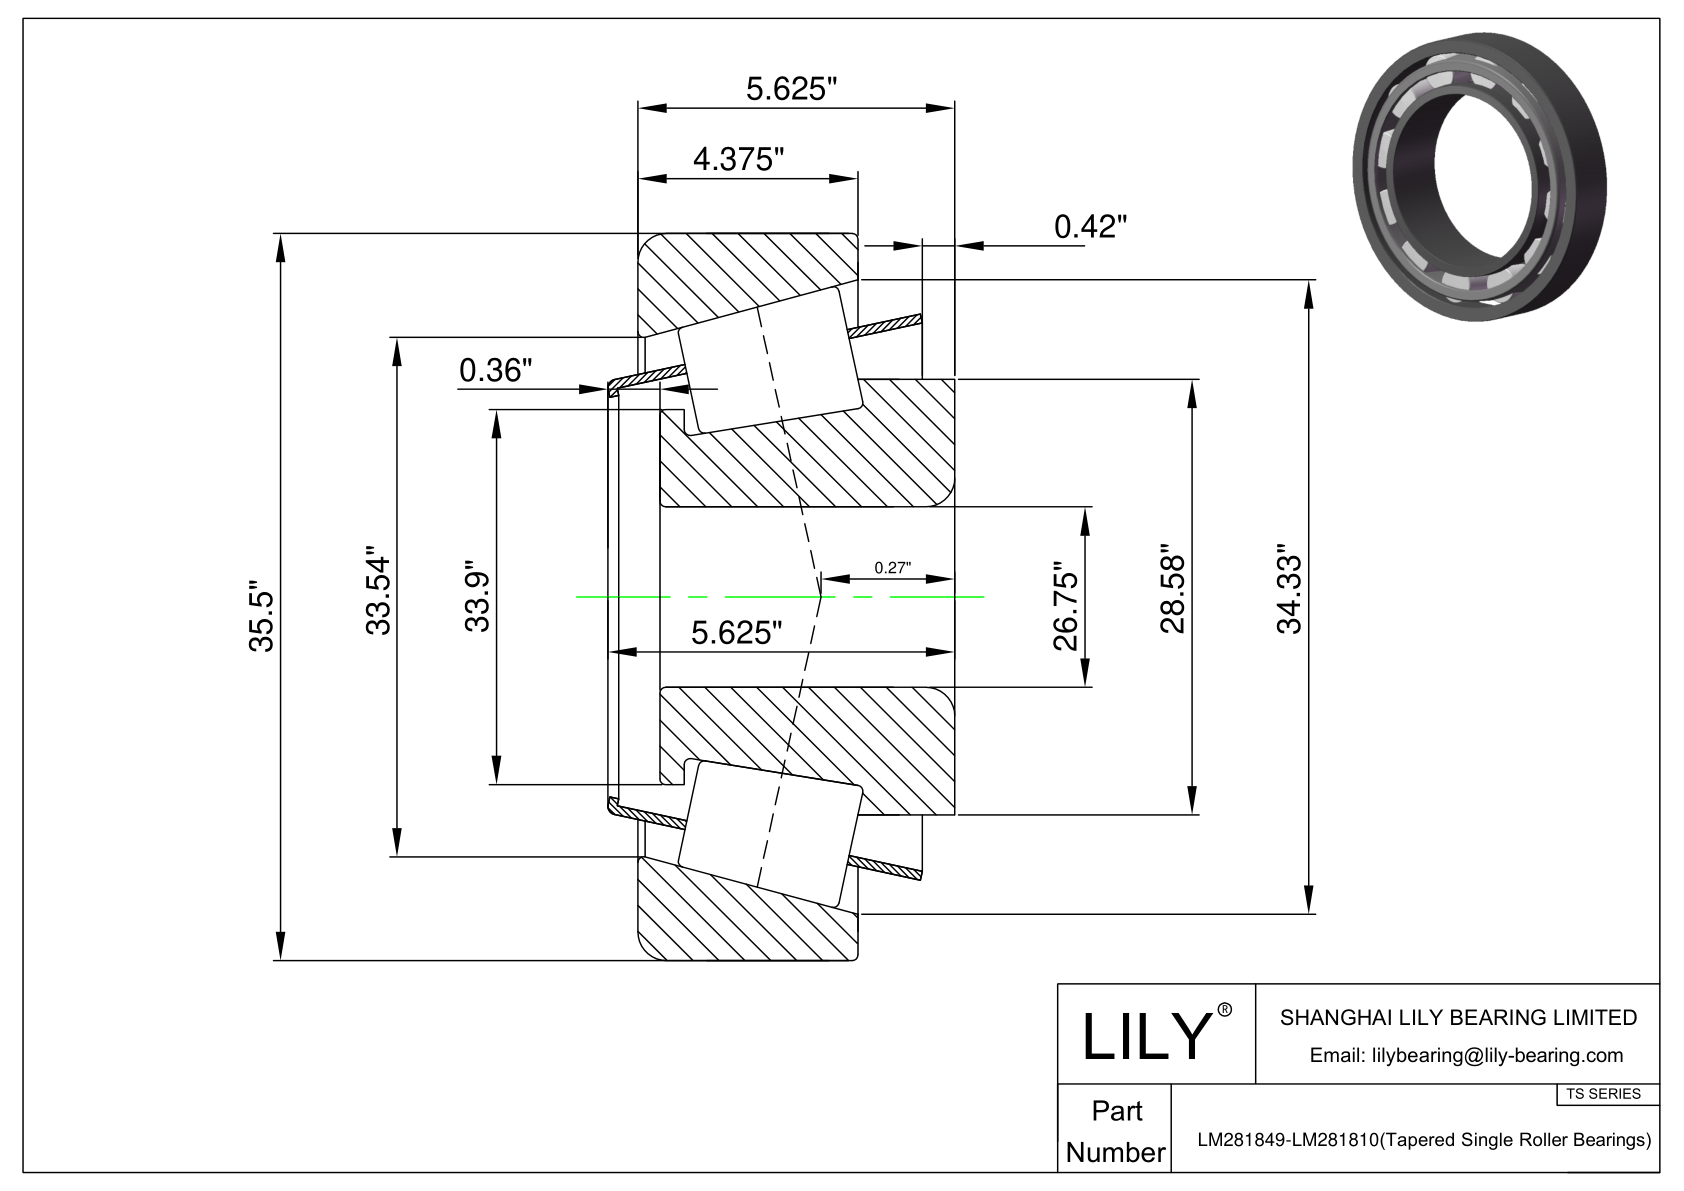 LM281849-LM281810 TS (Tapered Single Roller Bearings) (Imperial) cad drawing